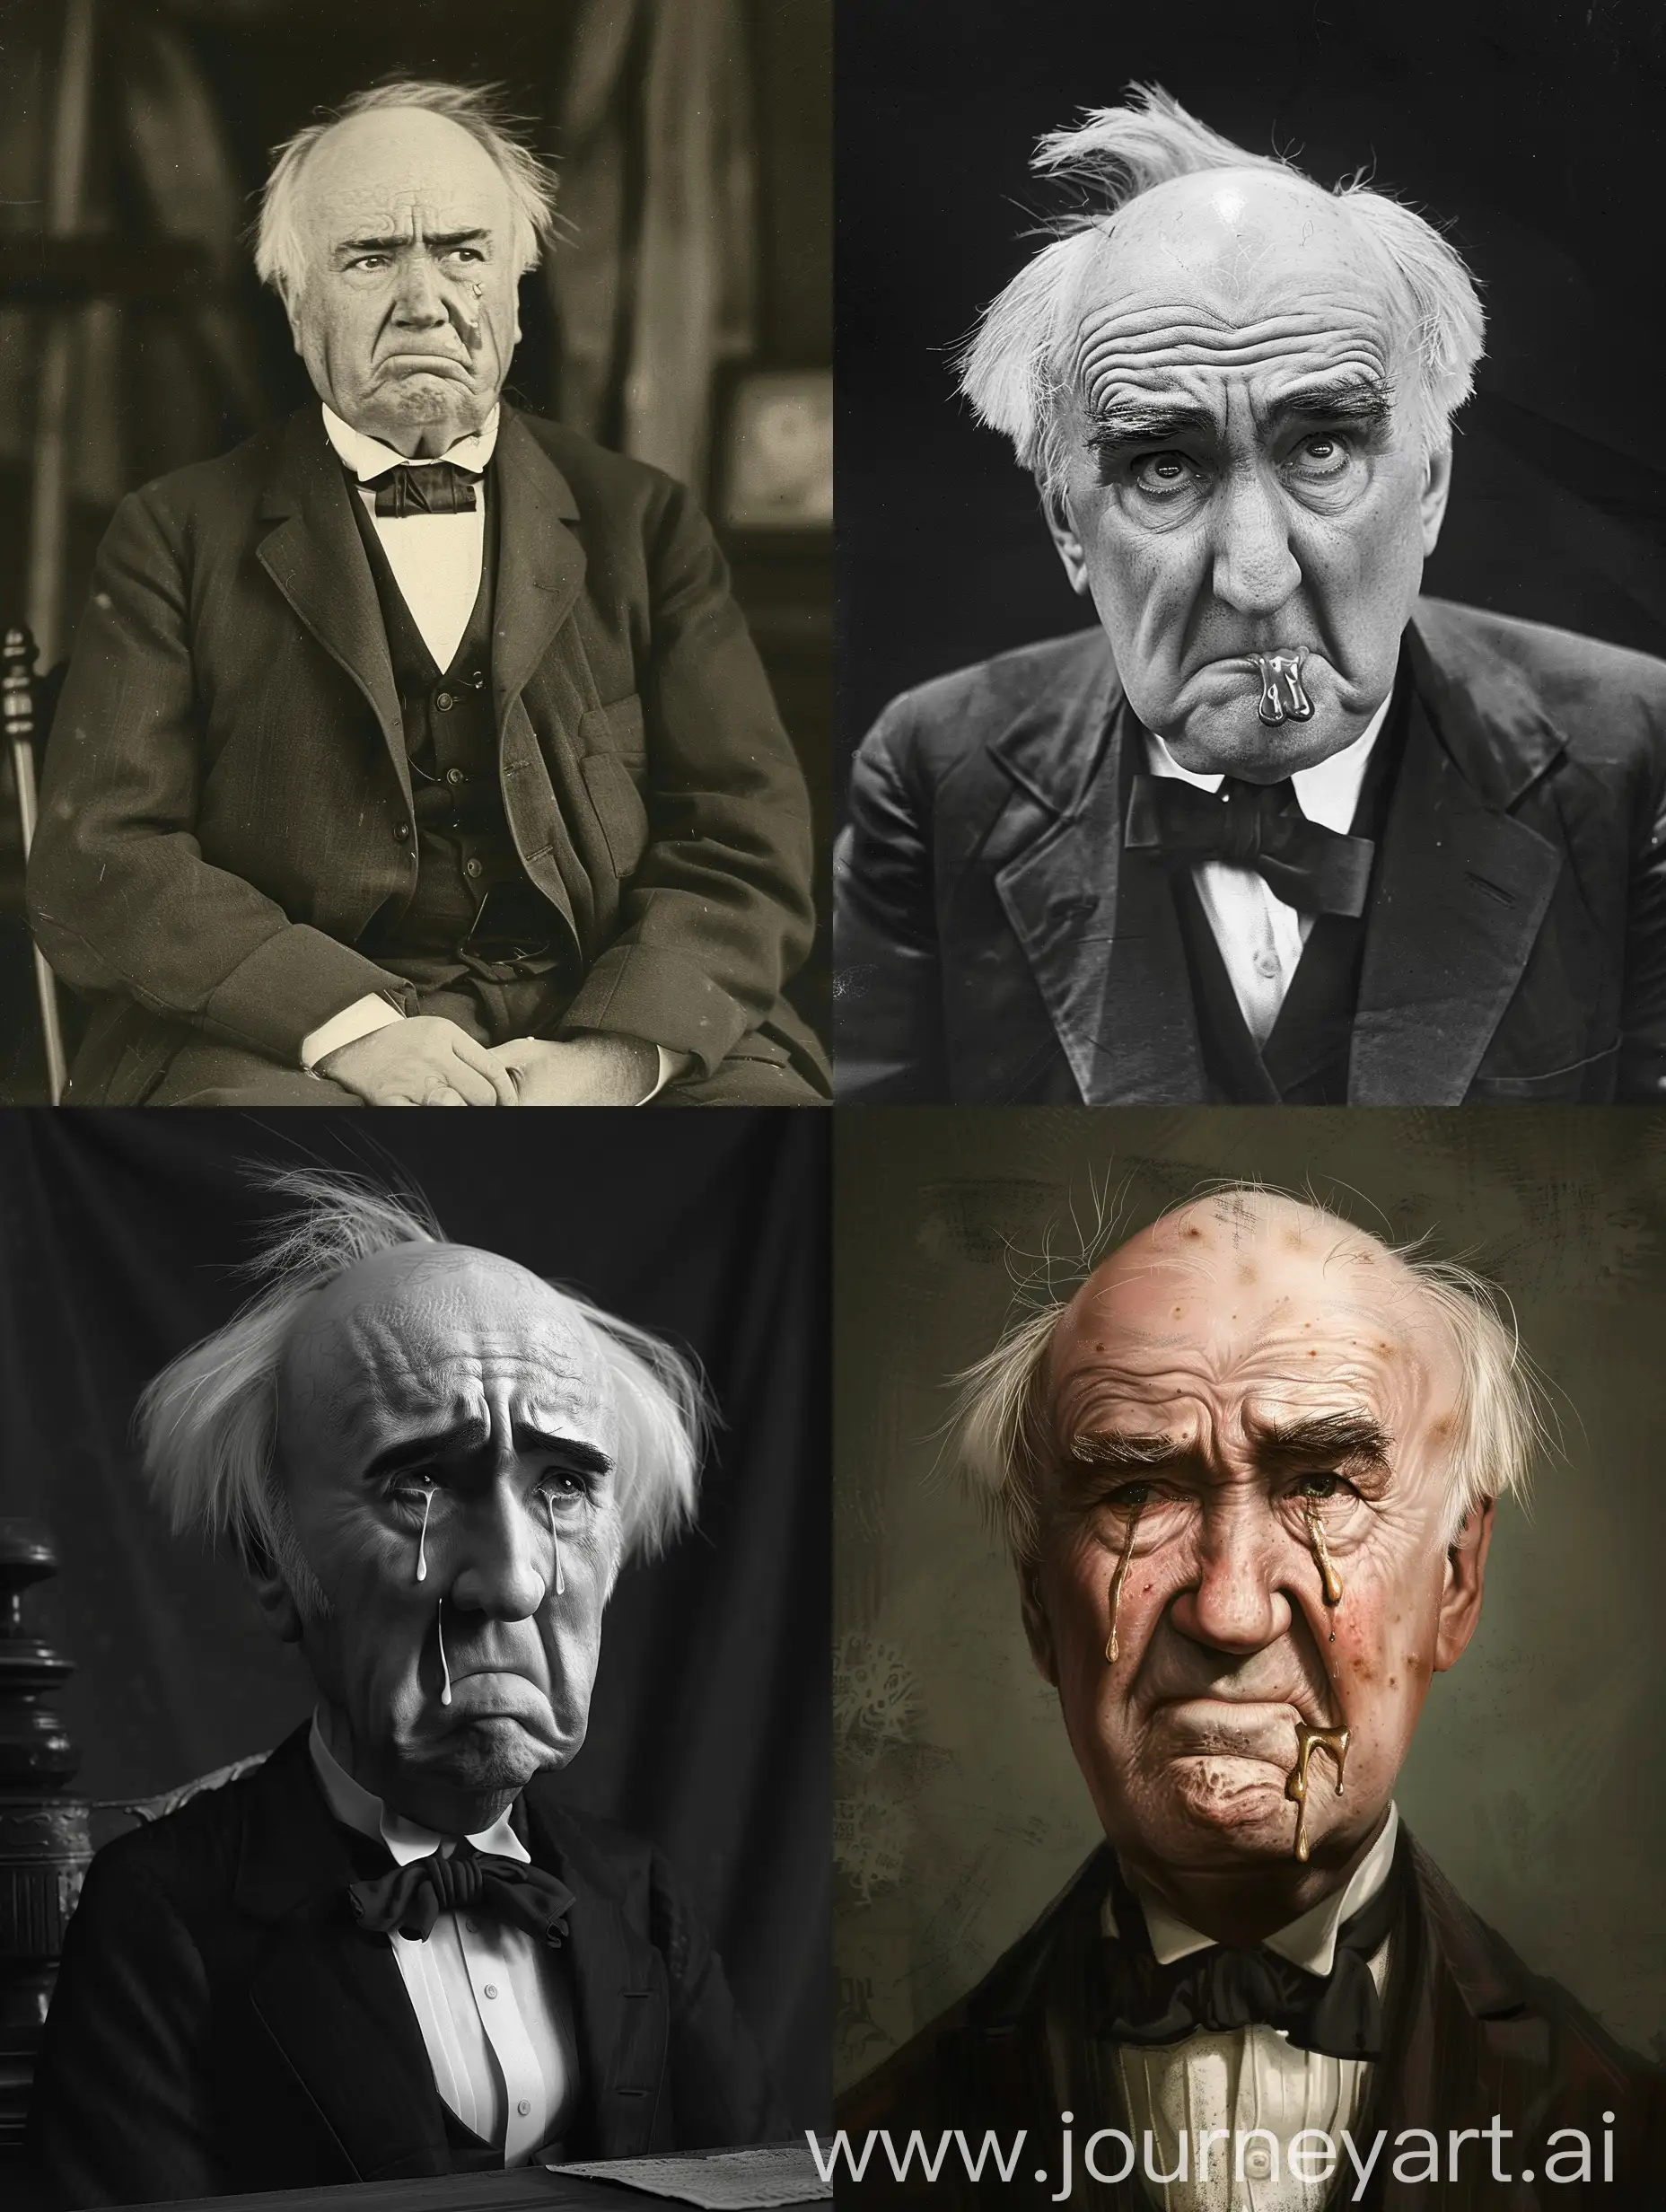 Thomas-Edison-Depicted-as-a-Weeping-Soyjak